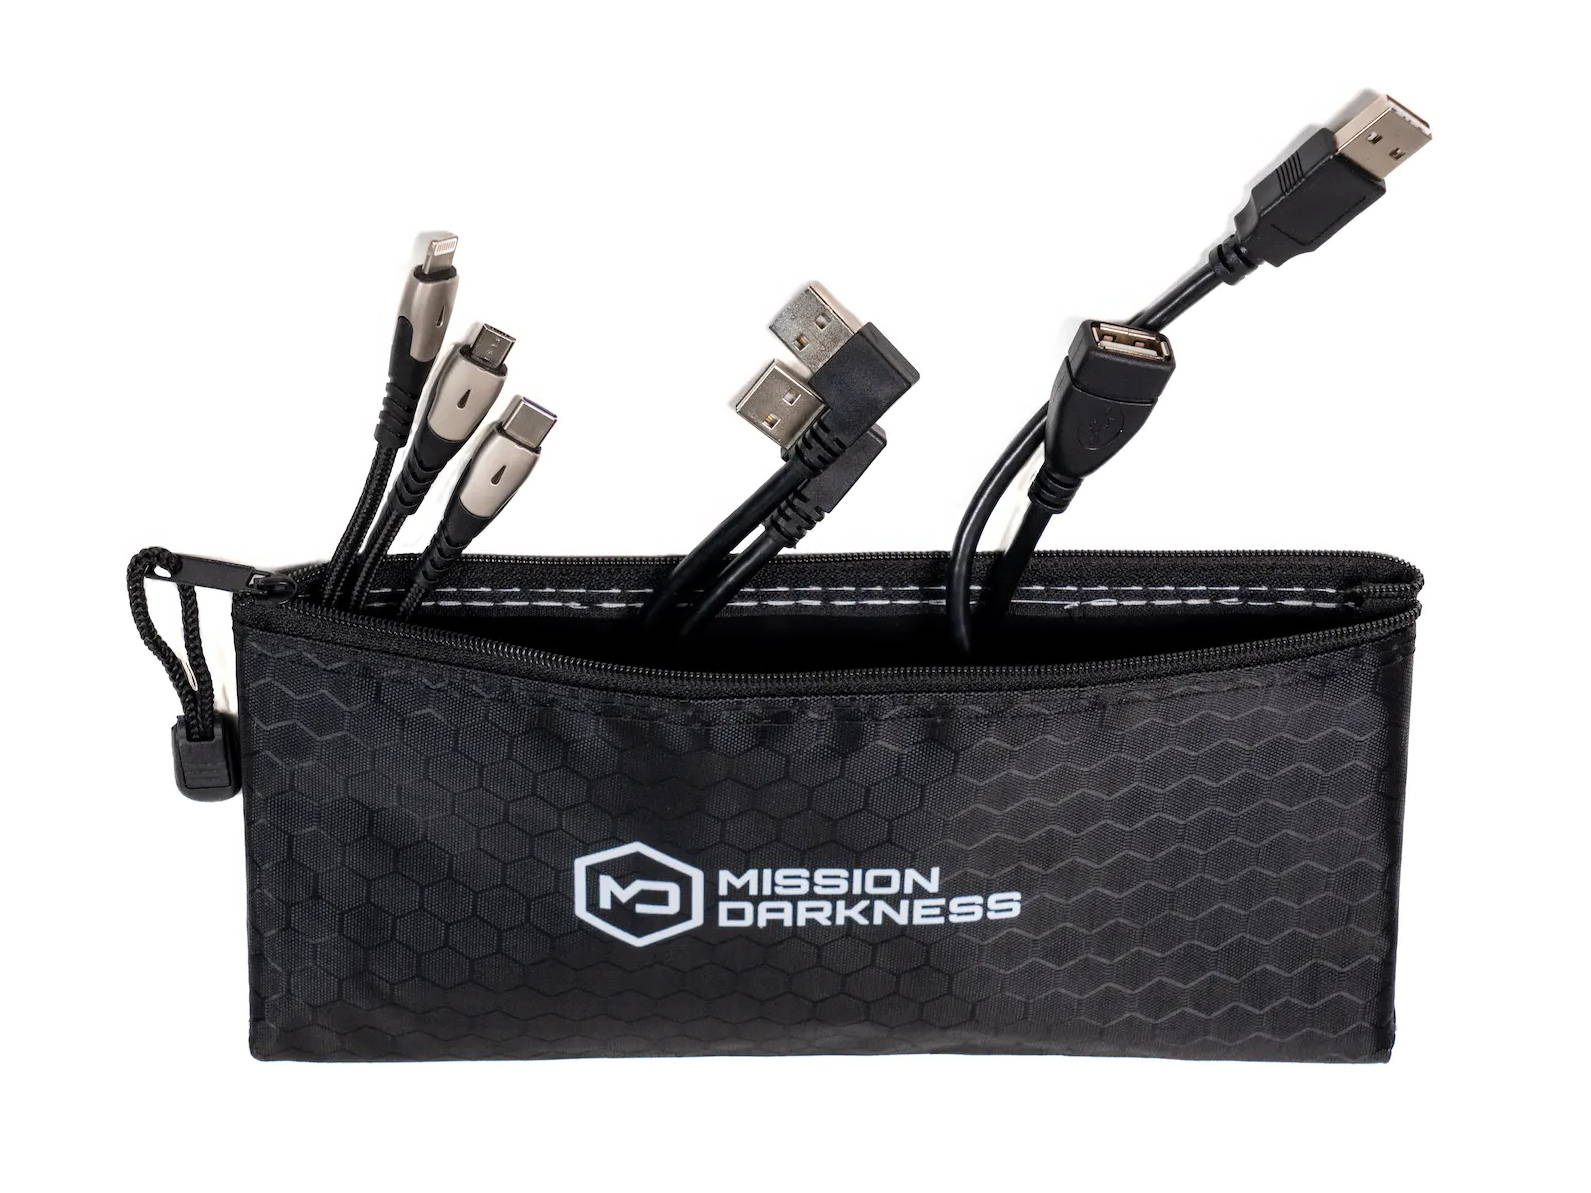 Mission Darkness High-Quality USB Cable Set